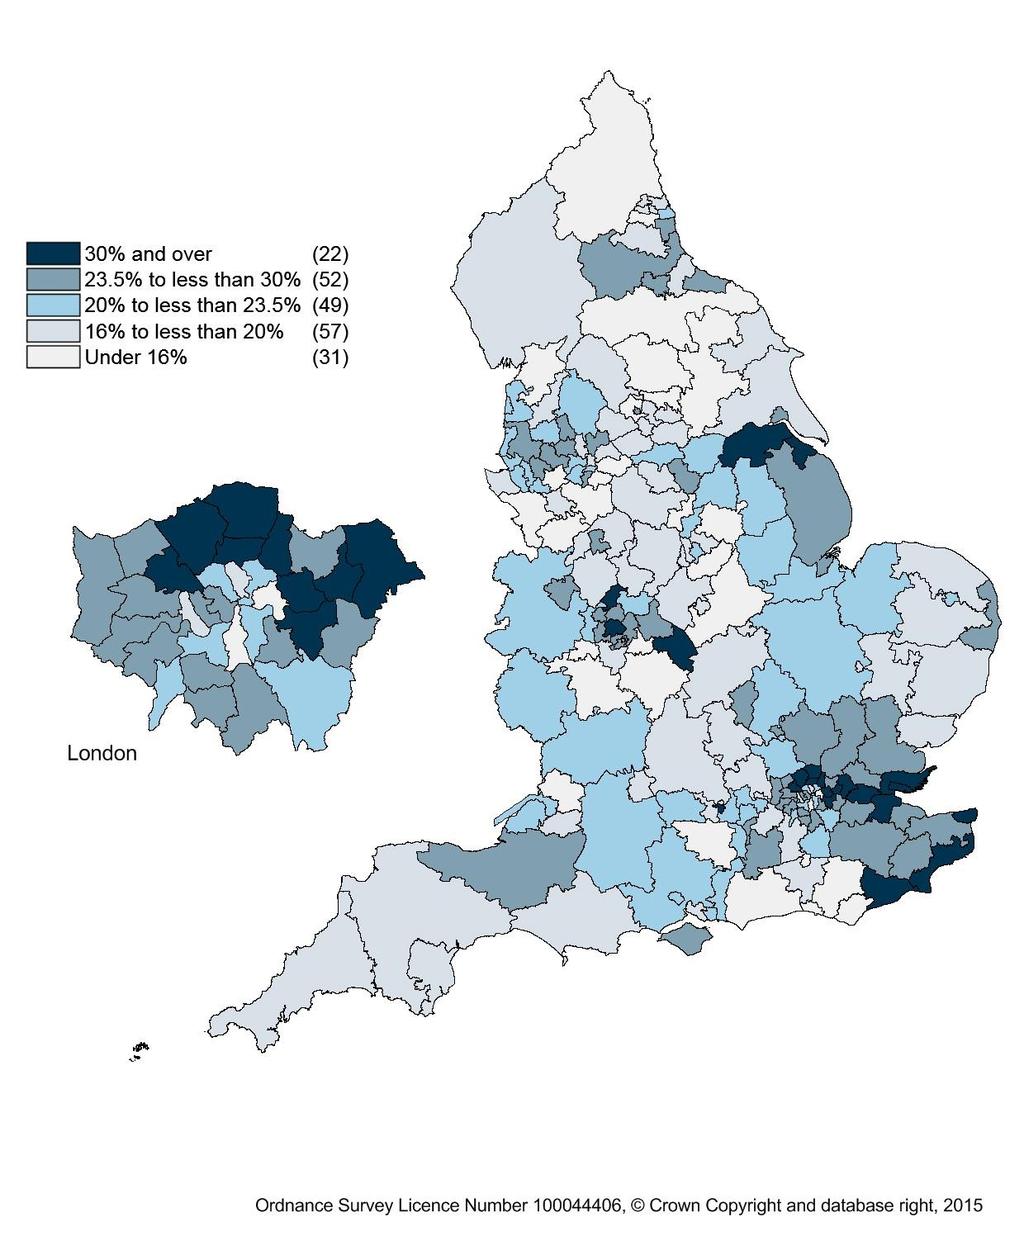 Map 8: Percentage of Practice Managers aged 55 and over by Clinical Commissioning Group